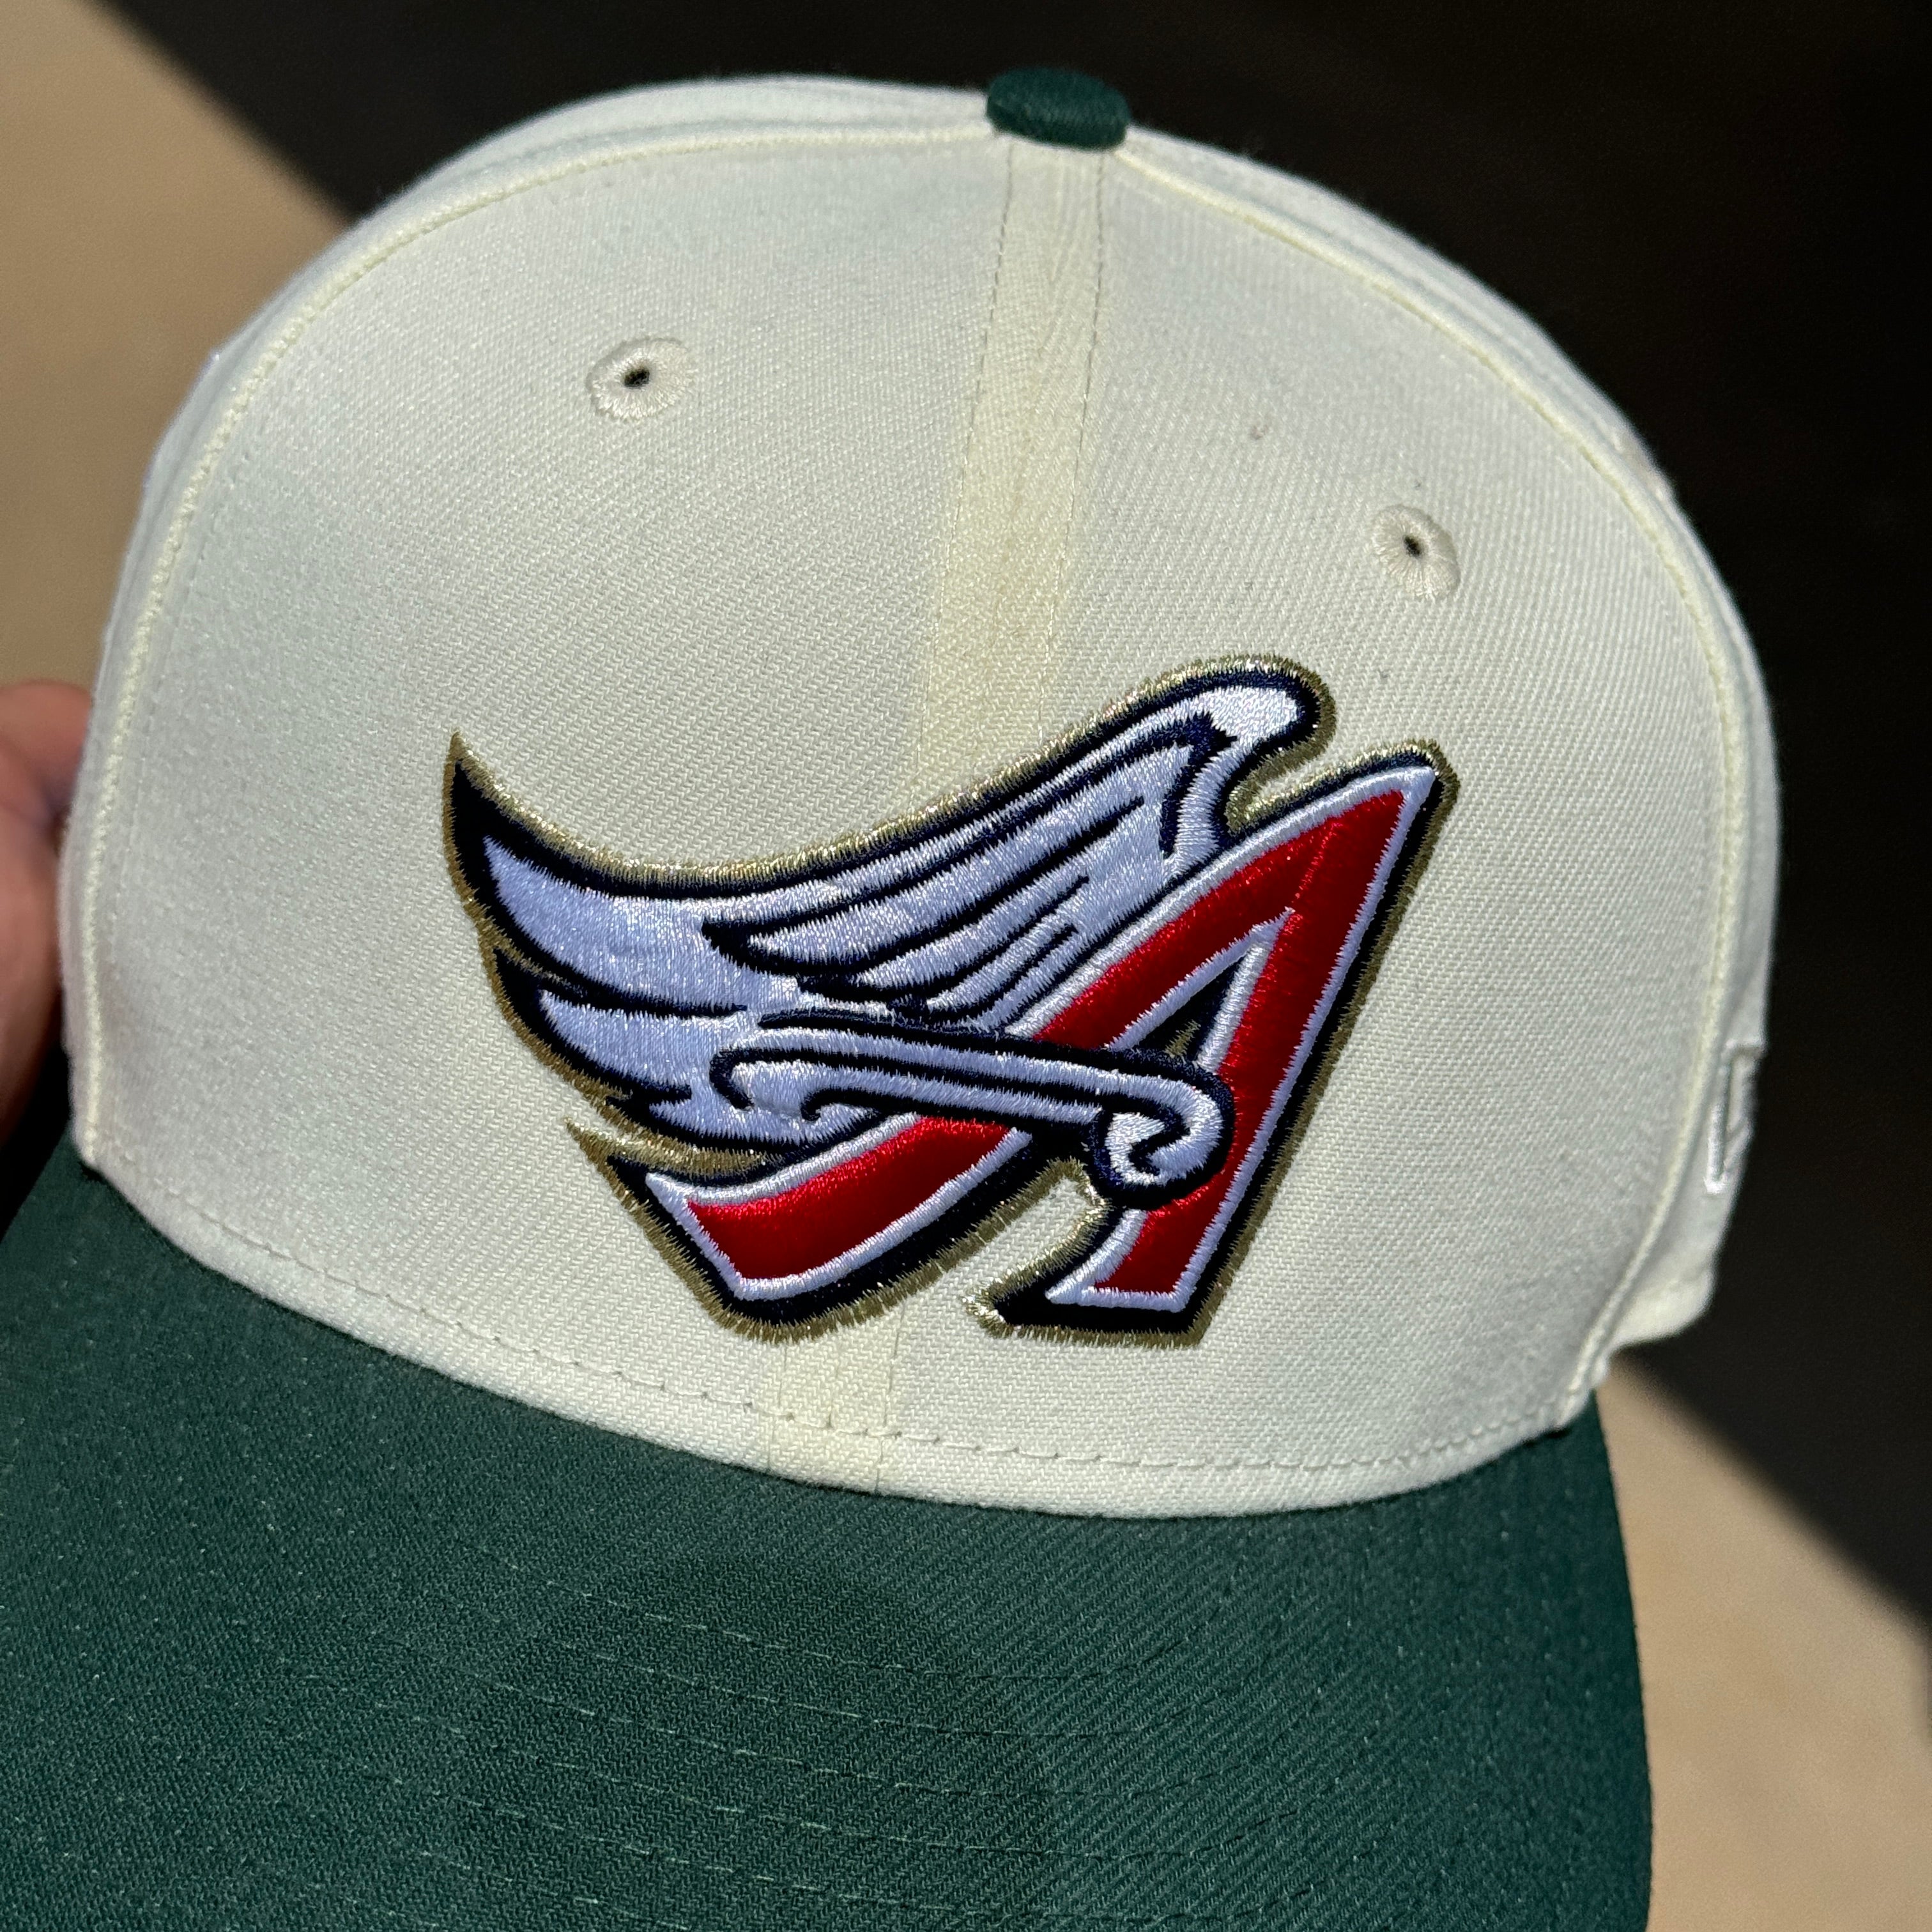 USED 3/8 Chrome Los Angeles Angels Anaheim 40th Season New Era Fitted Hat Cap